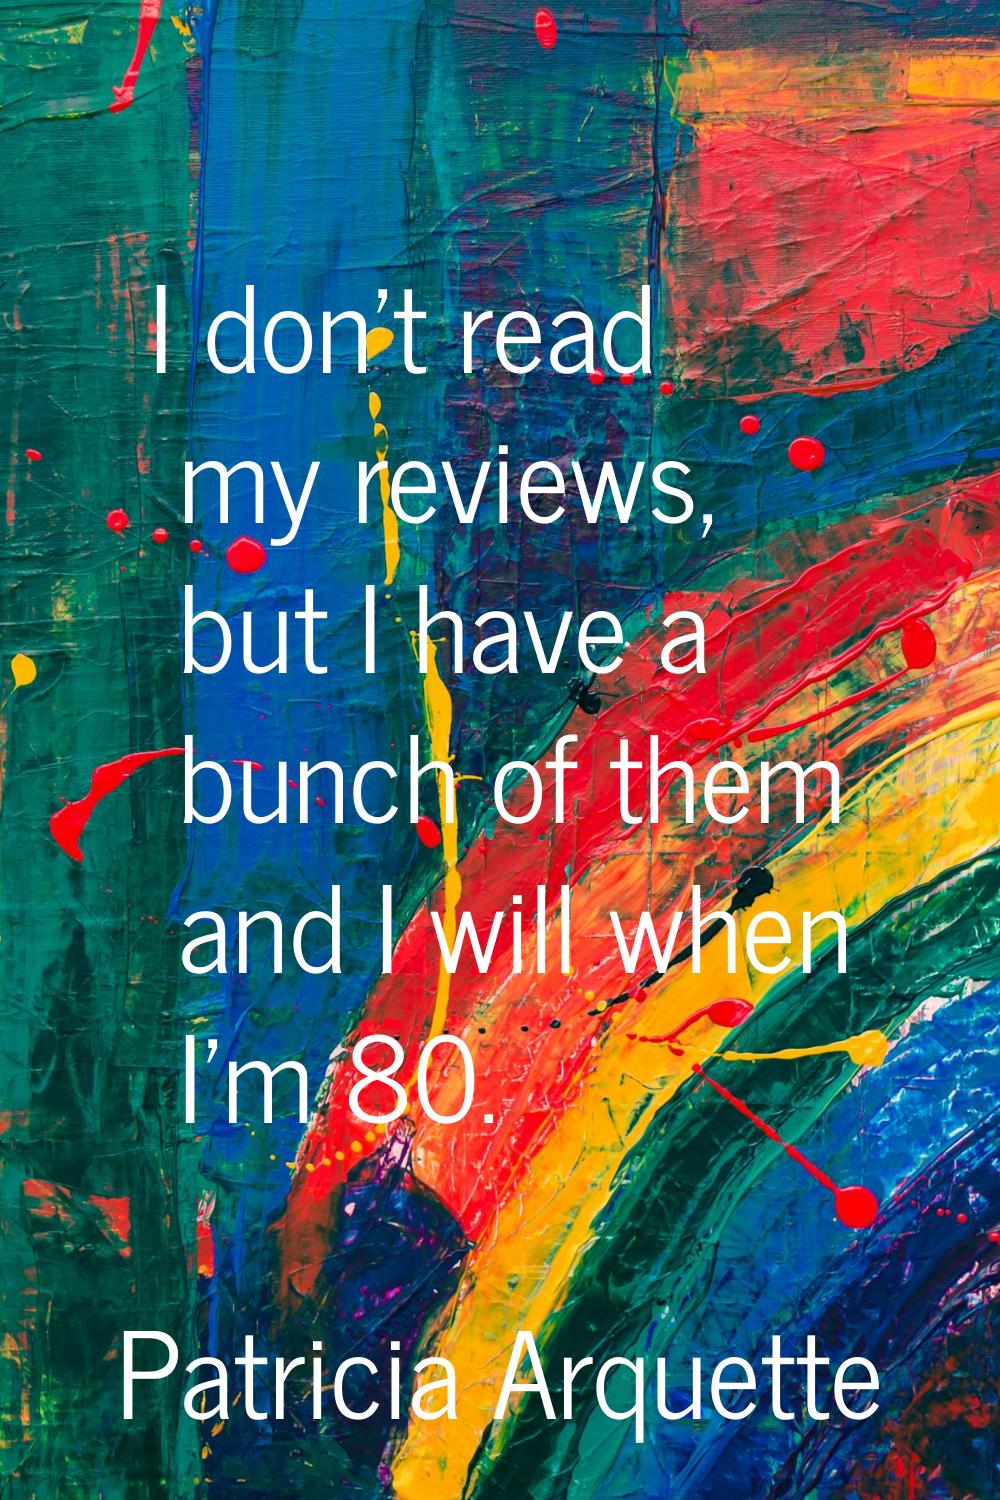 I don't read my reviews, but I have a bunch of them and I will when I'm 80.